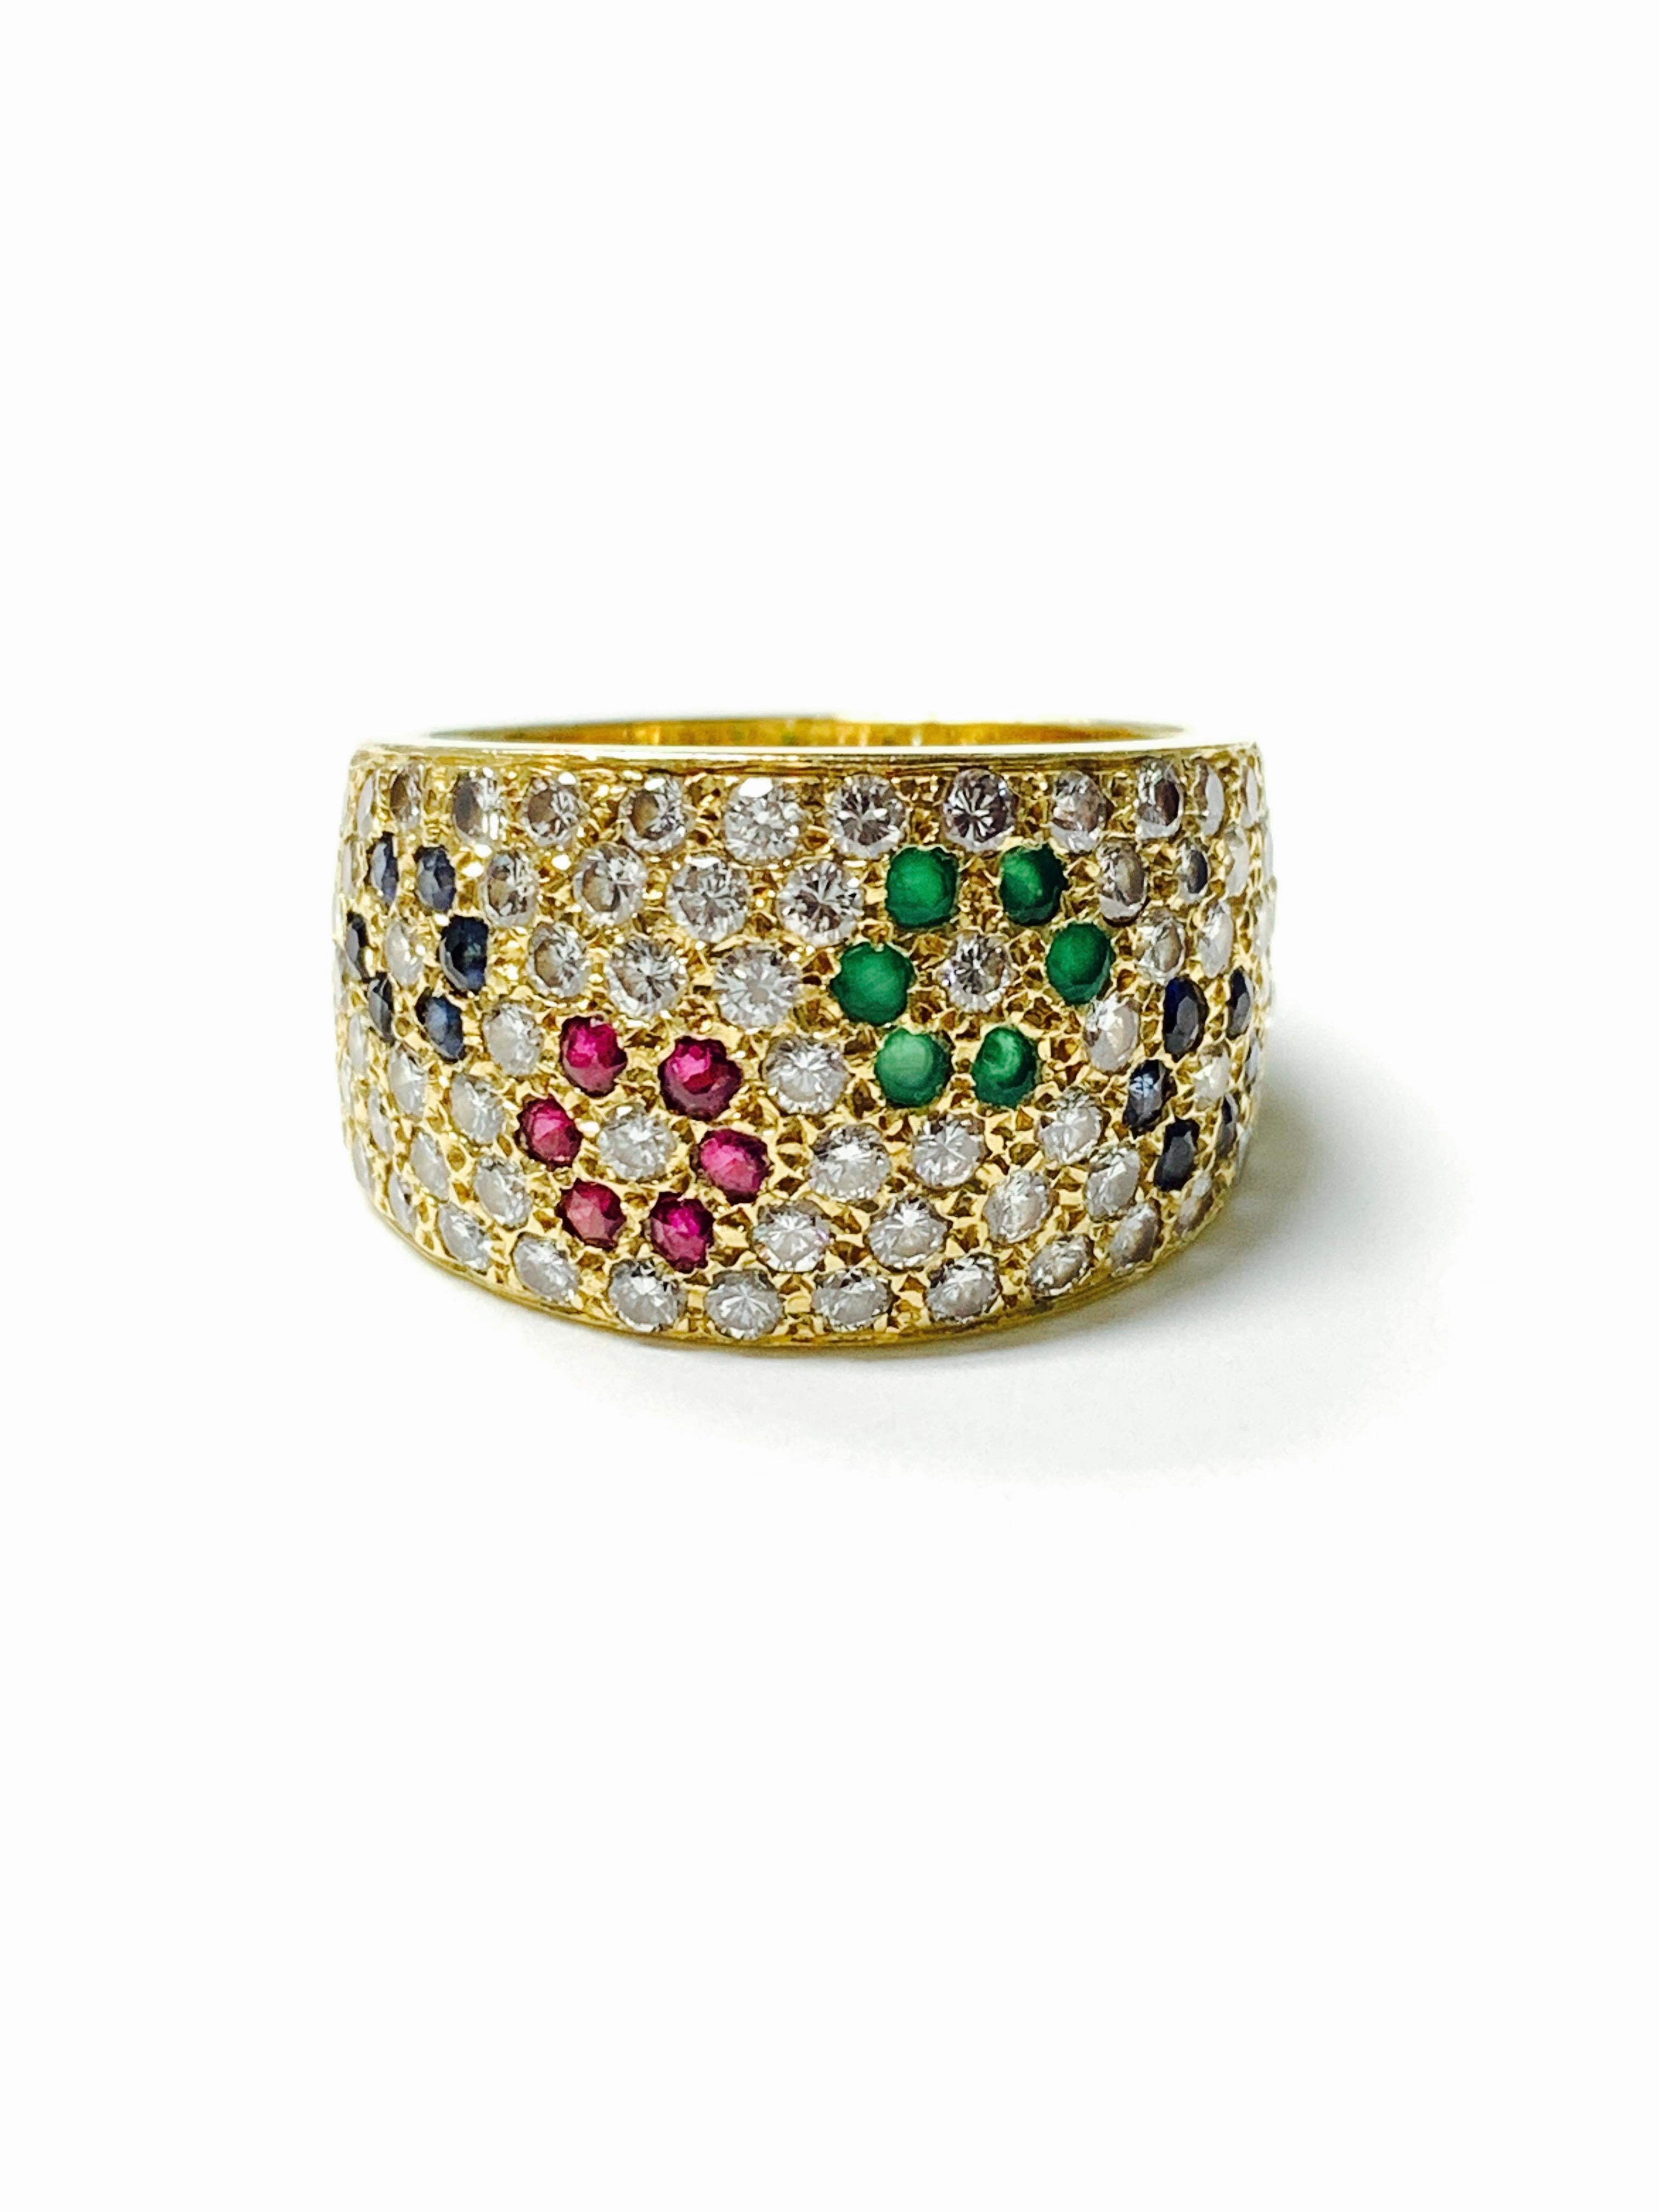 Diamond, Ruby, Emerald and Blue Sapphire Ring in 18 K Gold 1